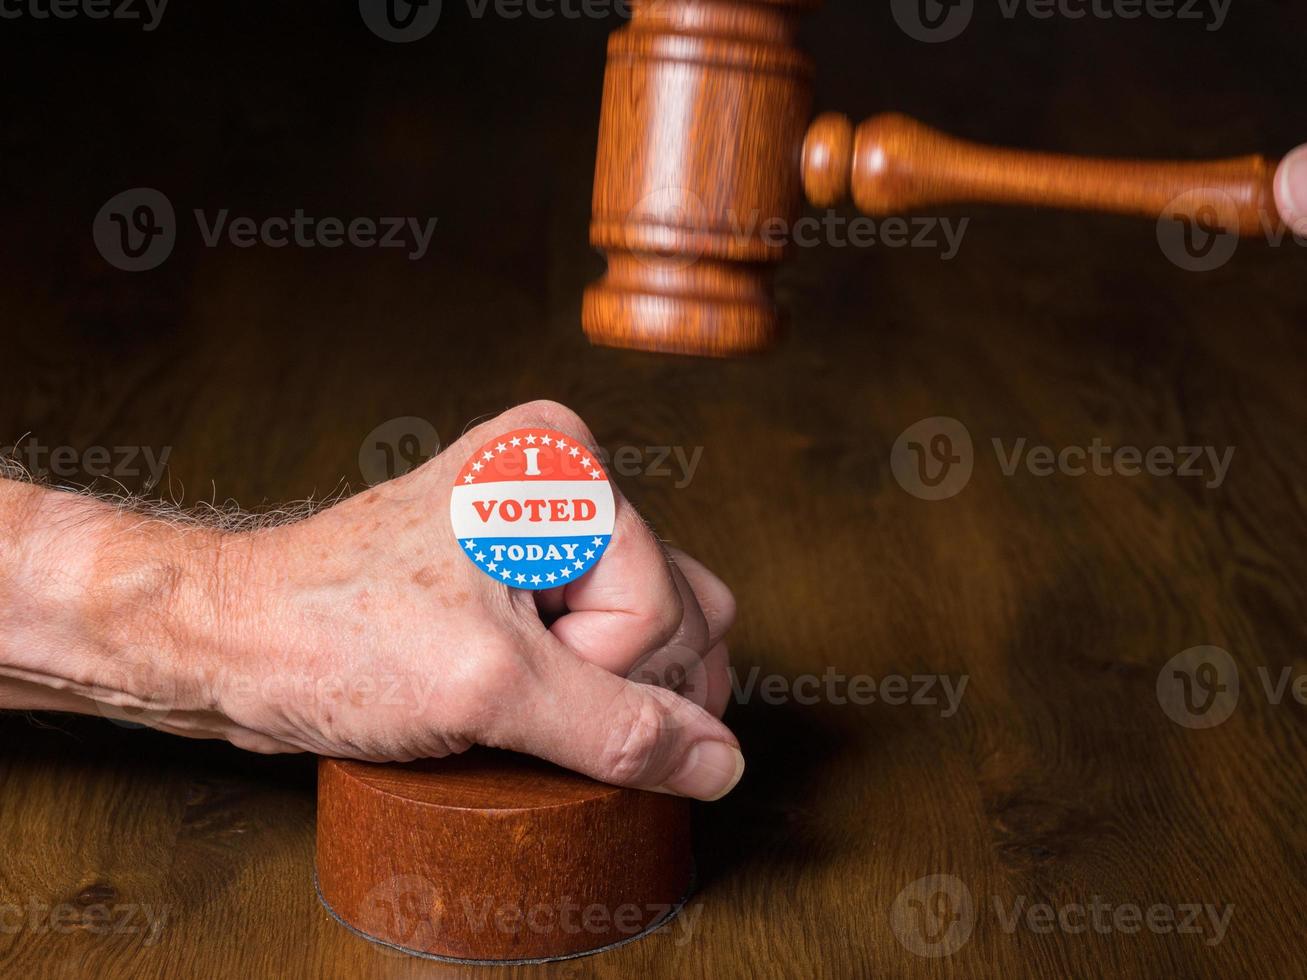 I voted campaign button or sticker on hand with a gavel and mallet to illustrate lawsuits about voting photo